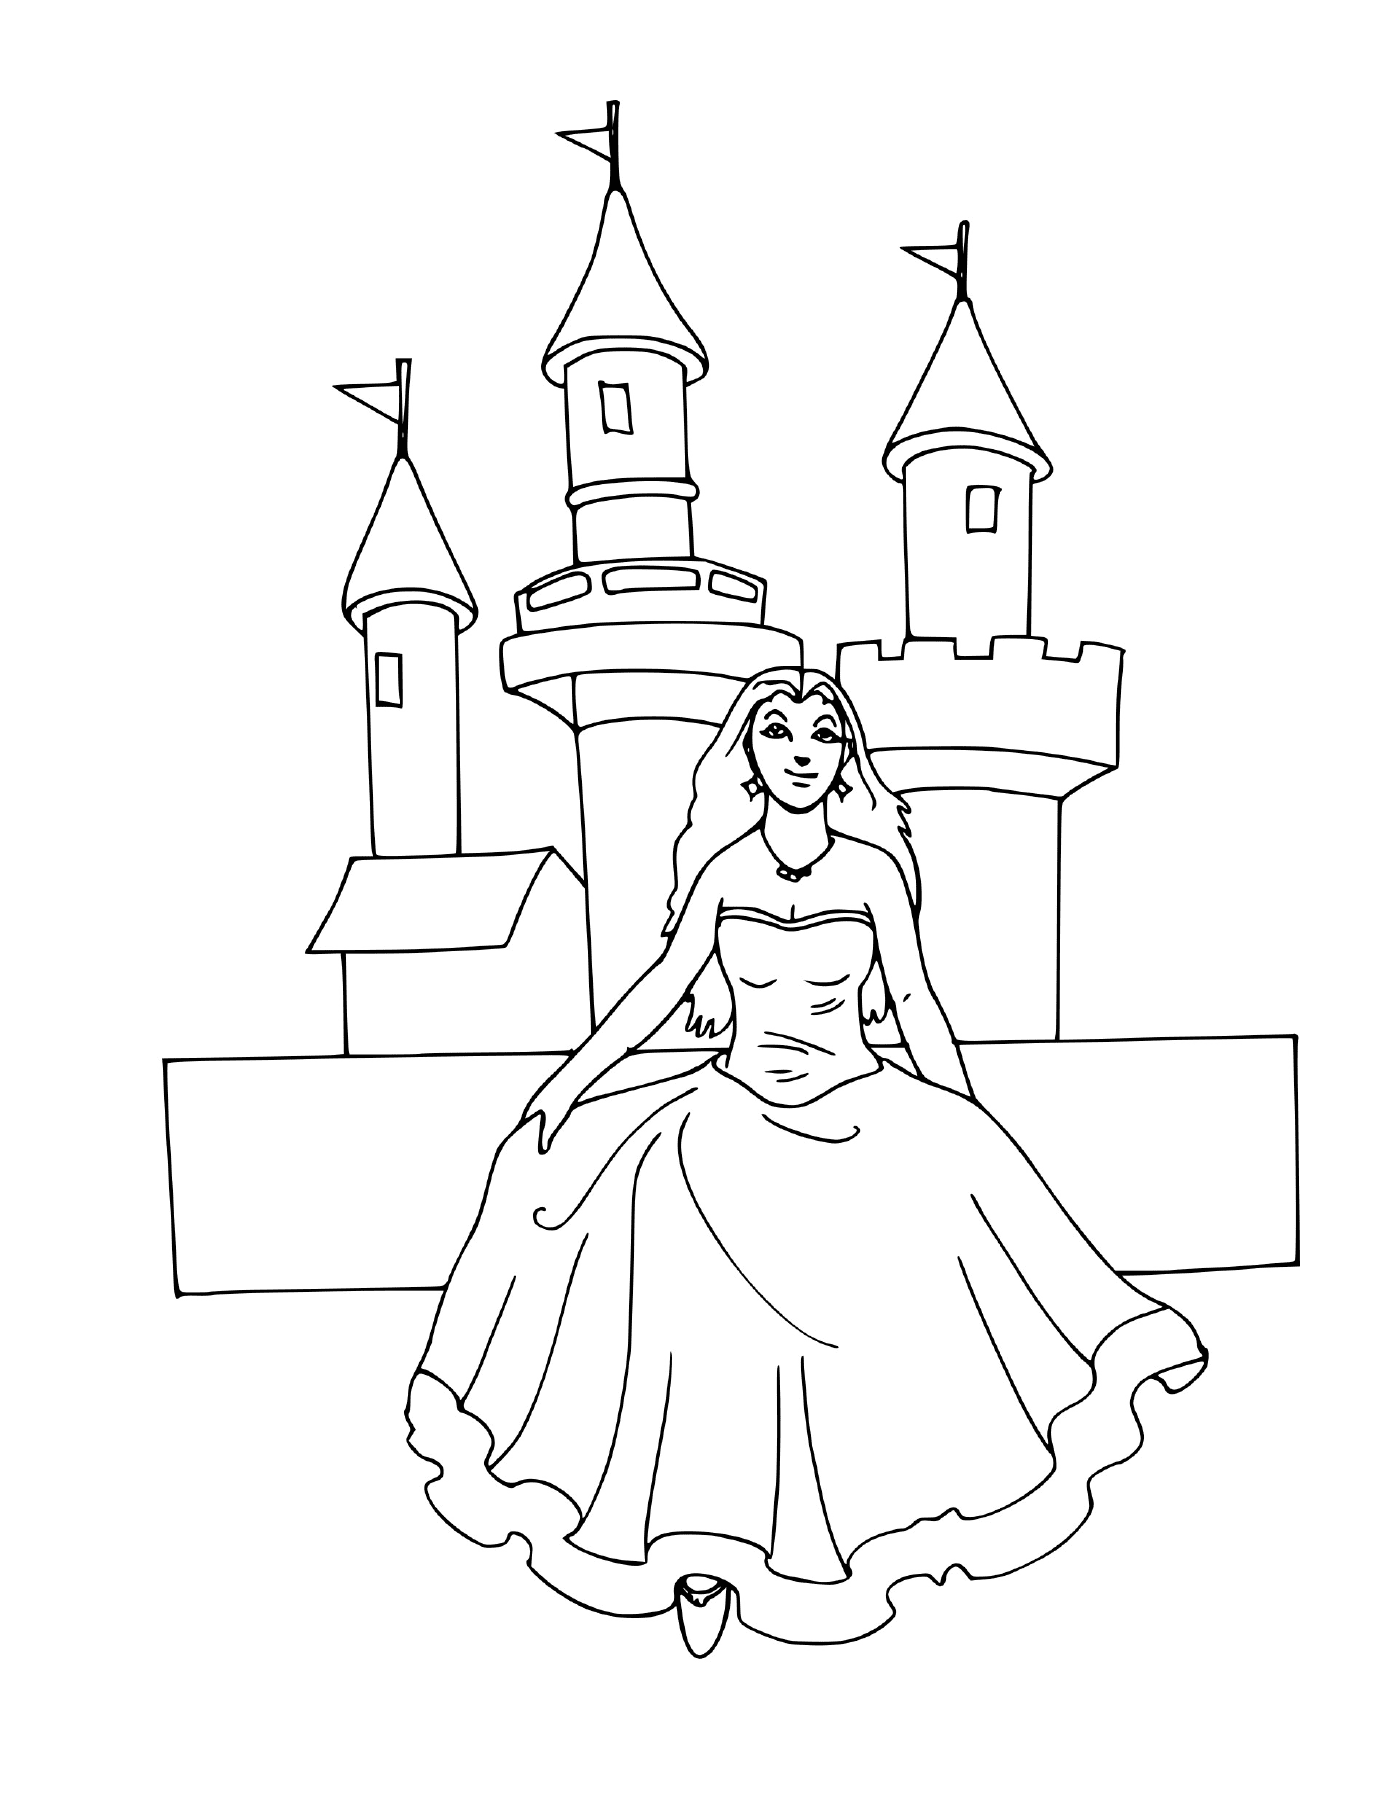  A woman sitting in front of a Princess Disney castle 